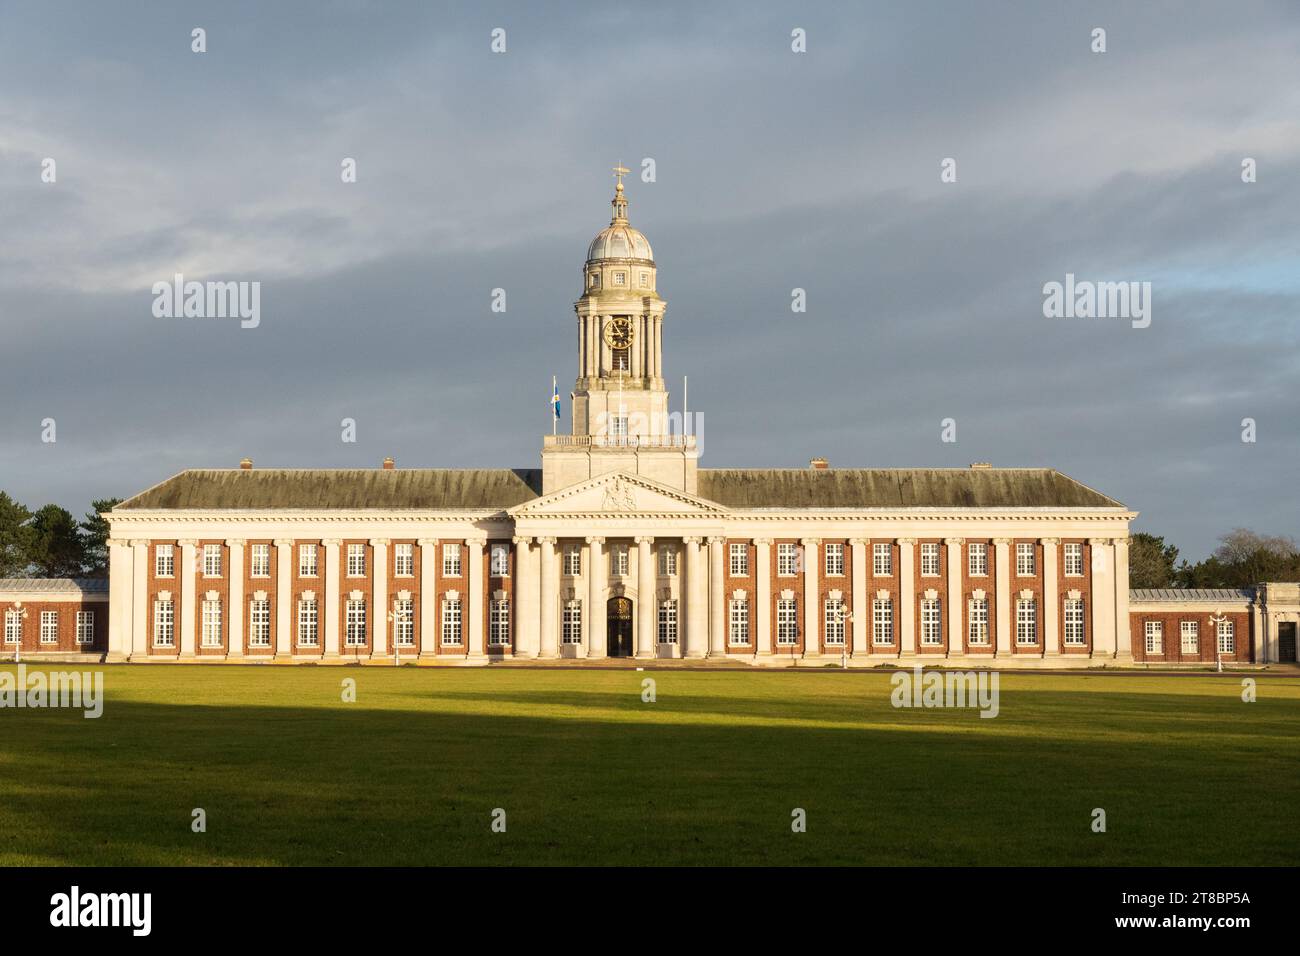 College Hall Offiziere Mess, CHOM, RAFC Cranwell. Sleaford, Lincolnshire, England. Stockfoto